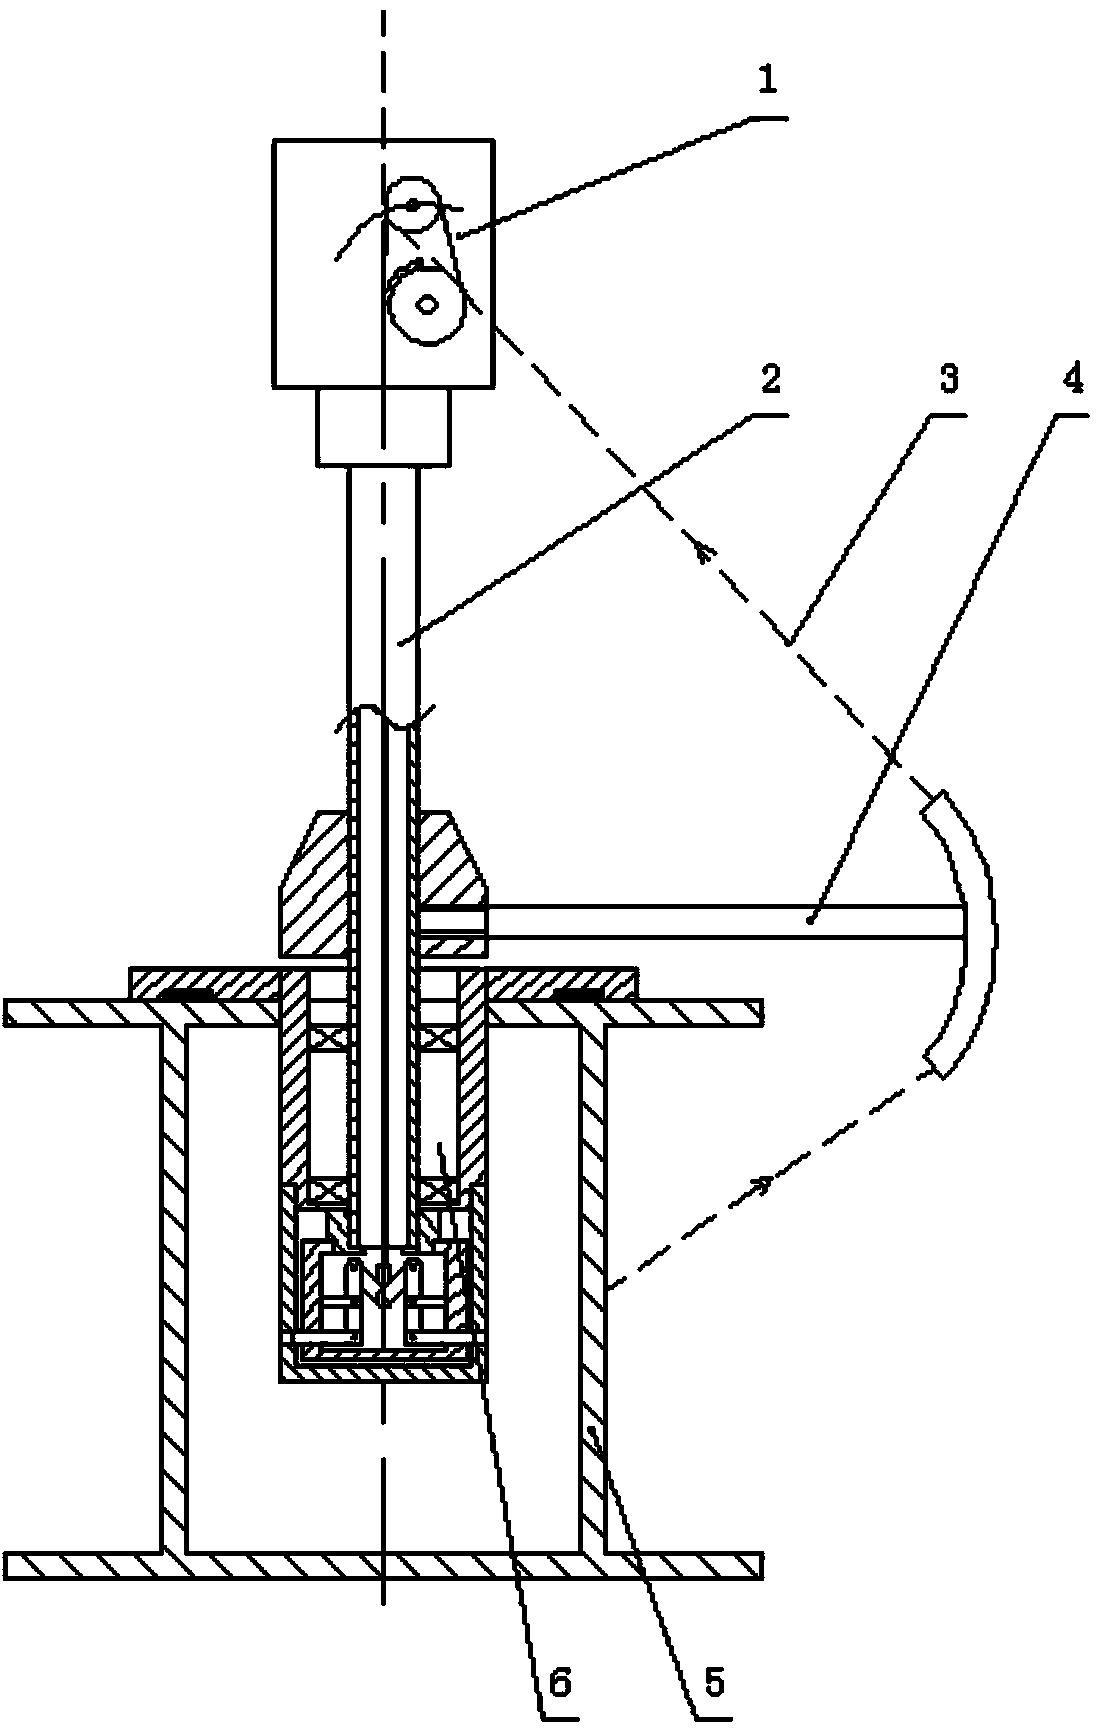 Axial pay-off device capable of preventing shutdown wire accumulation